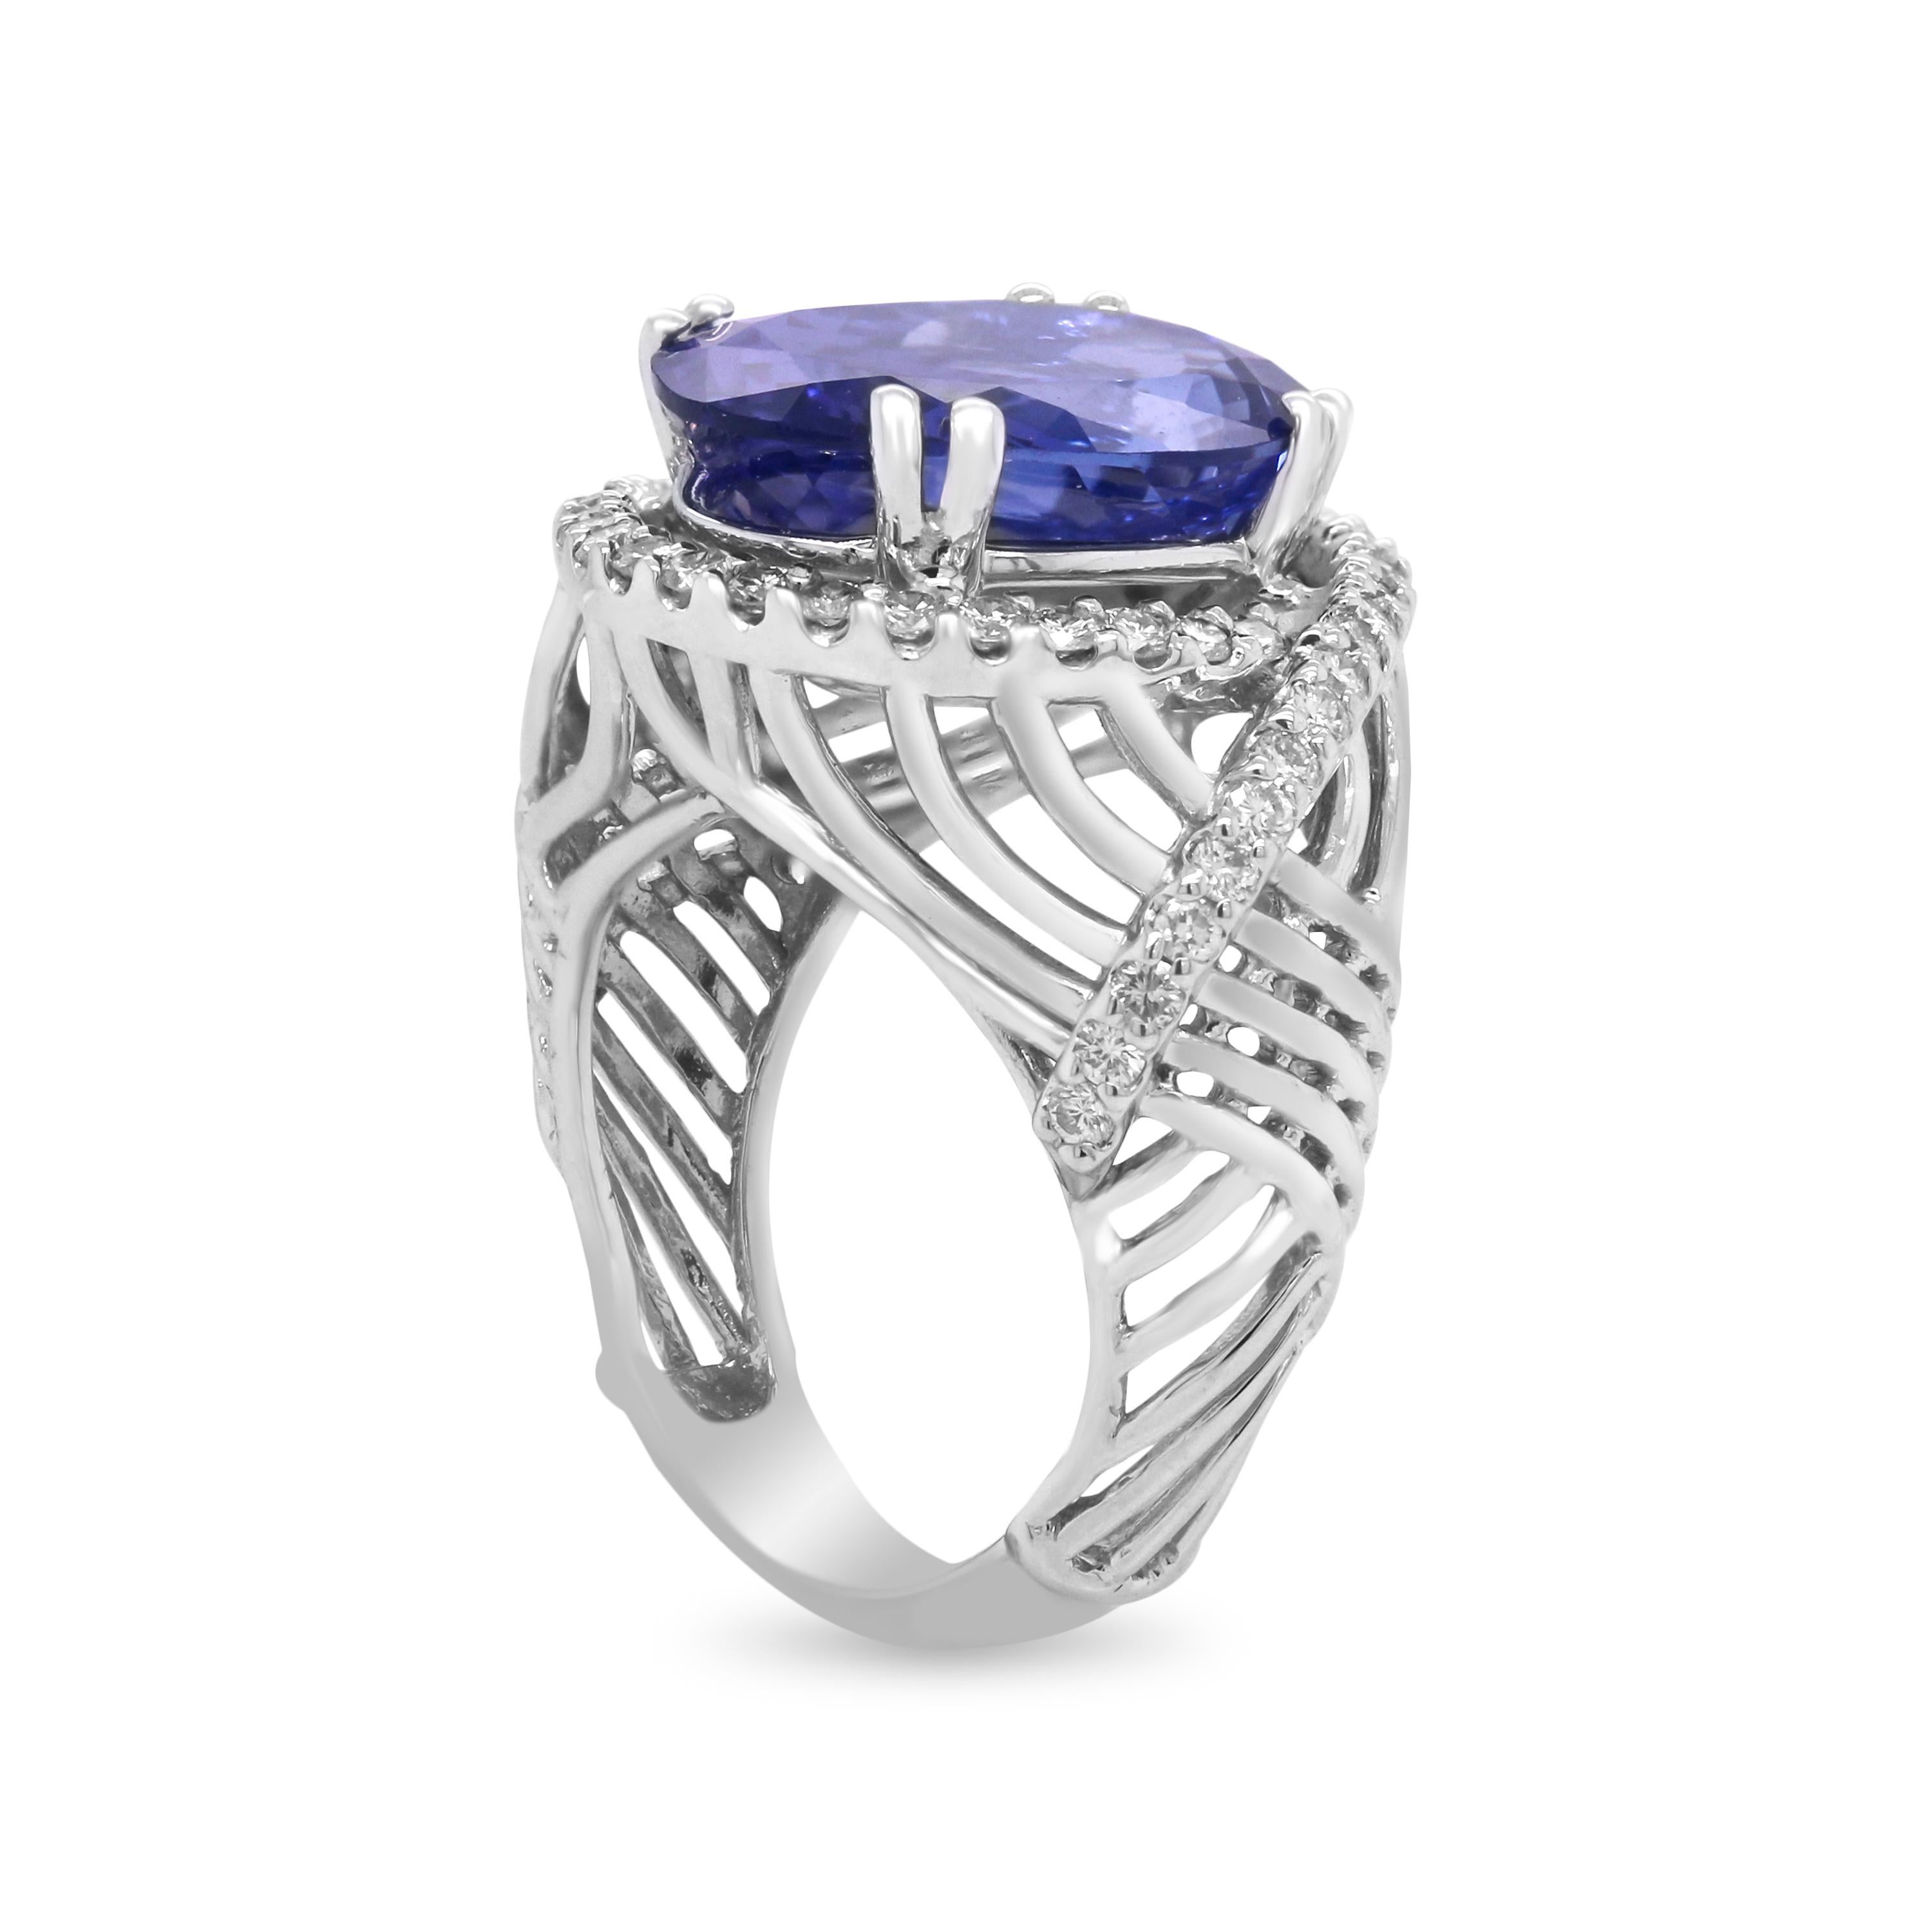 14K White Gold and Diamond Cocktail Ring with Tanzanite Center

This fun and everyday cocktail ring features a high-quality, oval-cut, Tanzanite center

10 carat apprx. Tanzanite center 

1.56 carat G color, VS clarity diamonds

Ring face is 20mm